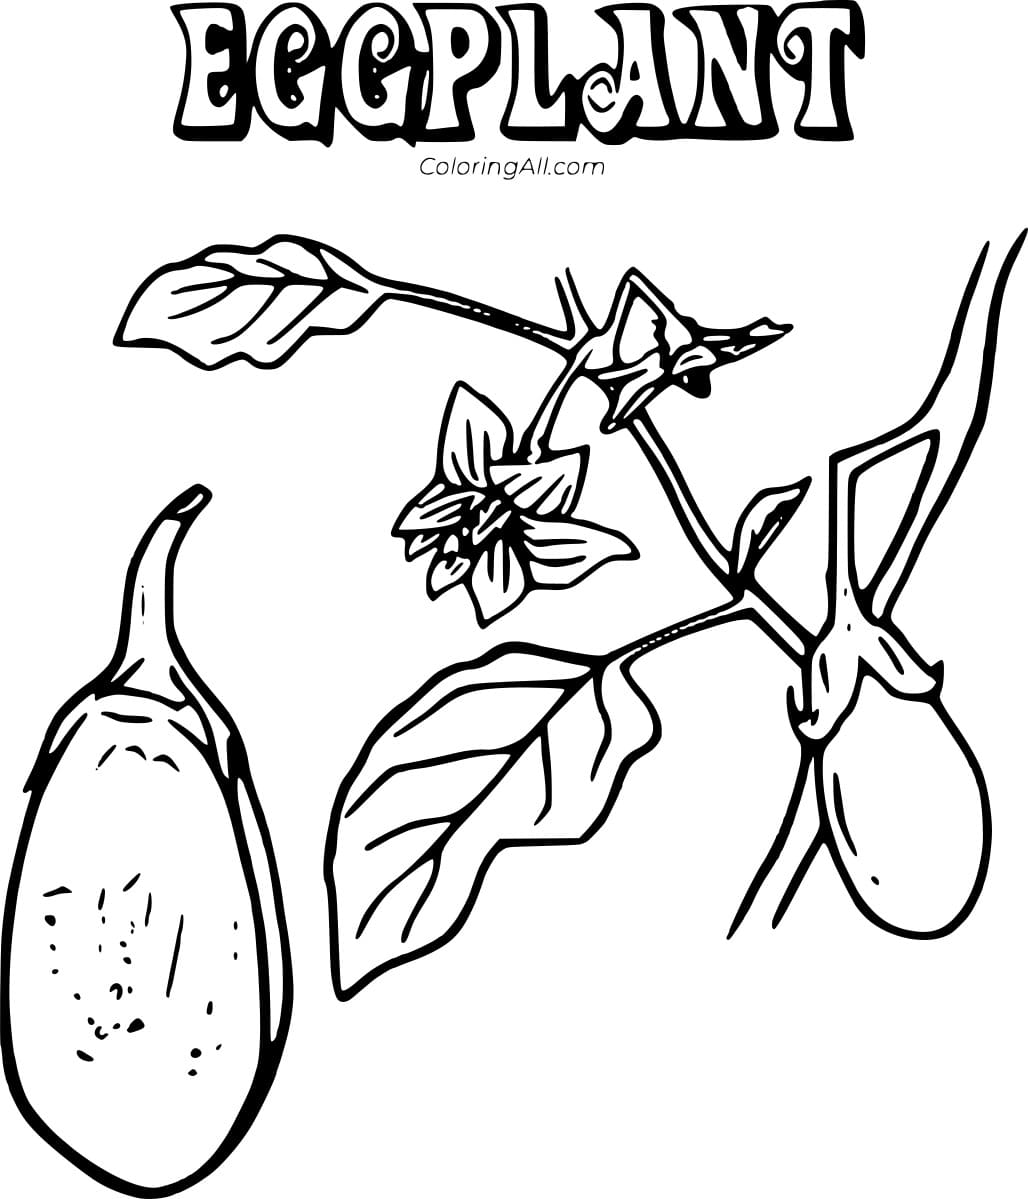 The Parts of an Eggplant Free Printable